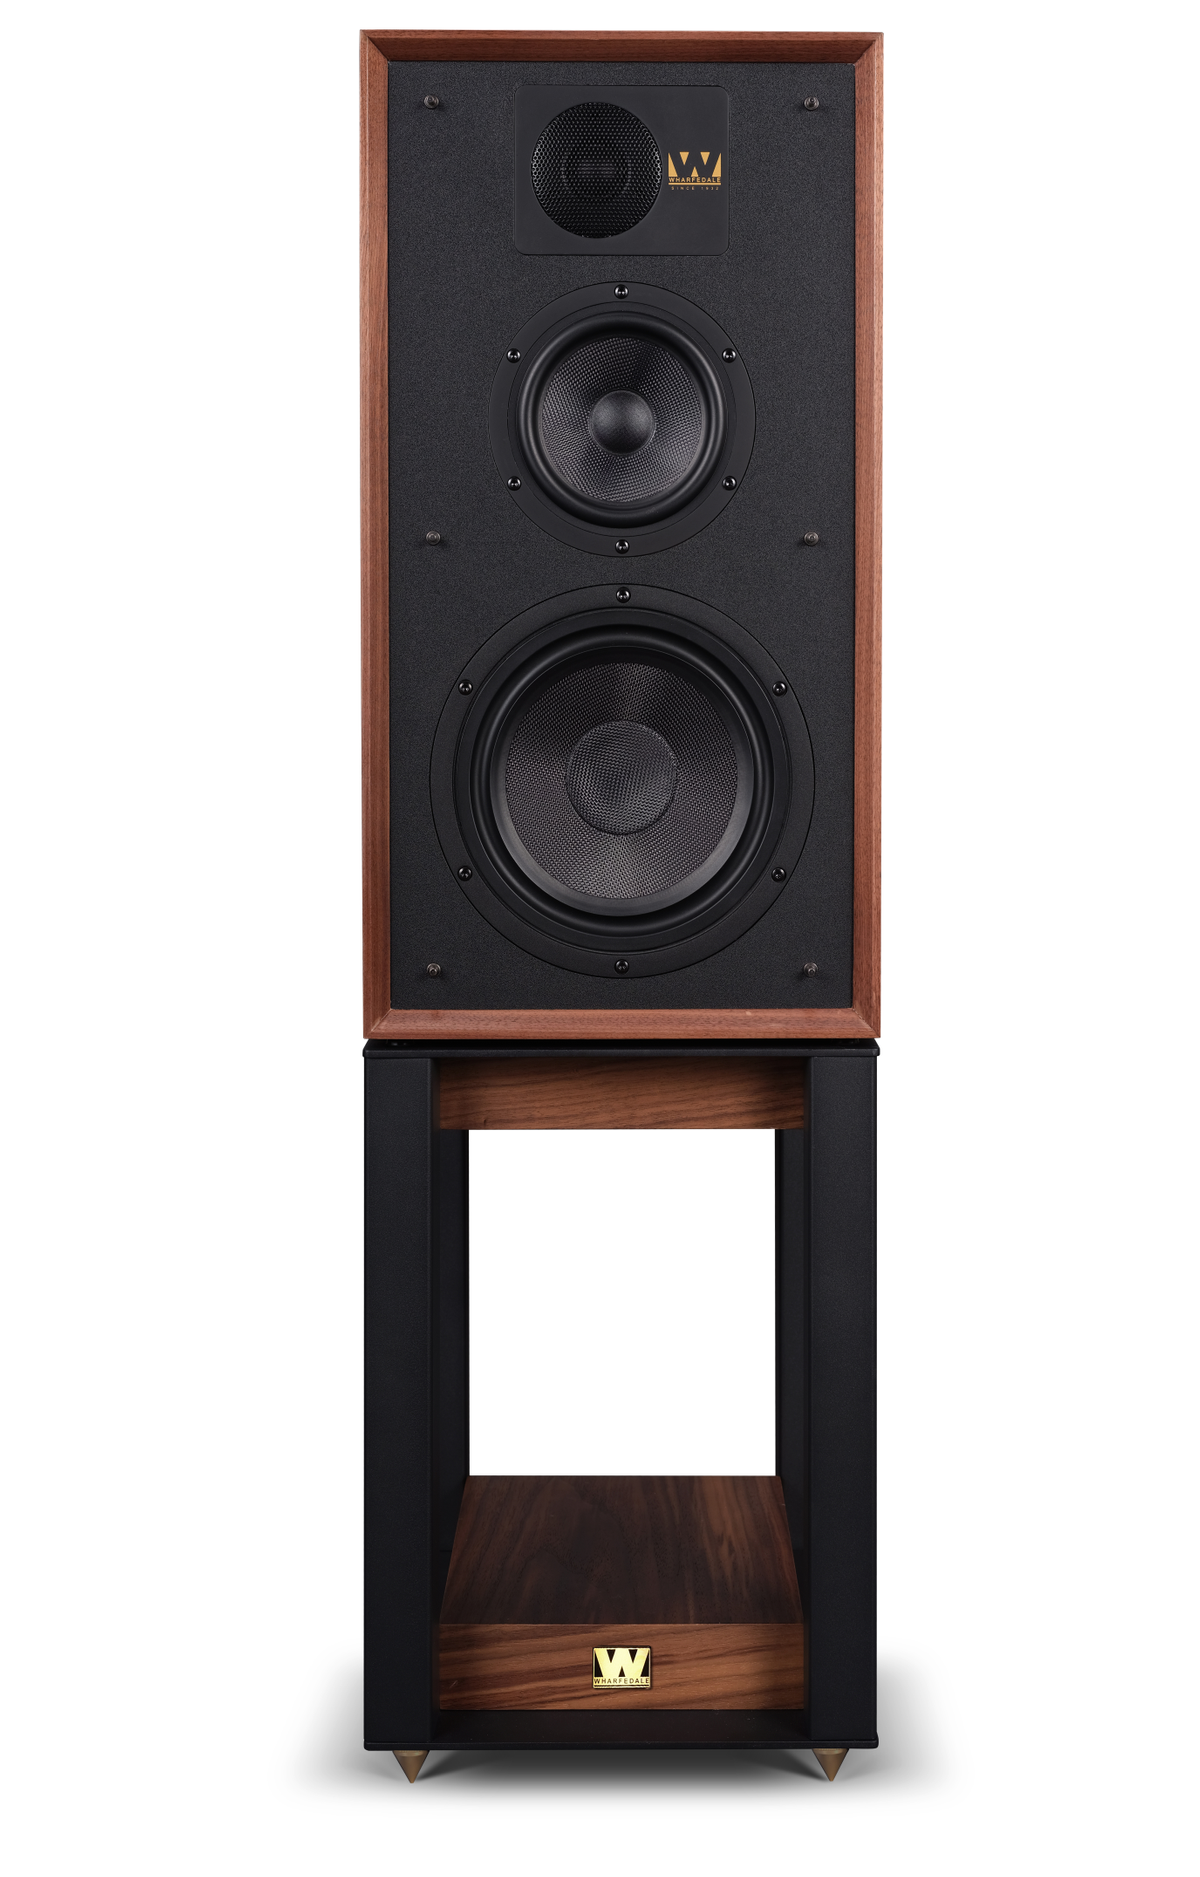 The custom-engineered LINTON STAND oﬀers optimum positioning and mounting for the LINTON speaker. Perfectly crafted with matching wood veneer ﬁnish, to match the LINTON cabinet, the LINTON STAND supports the size and weight of the cabinet, while presenting the listening axis perfectly to the seated user.